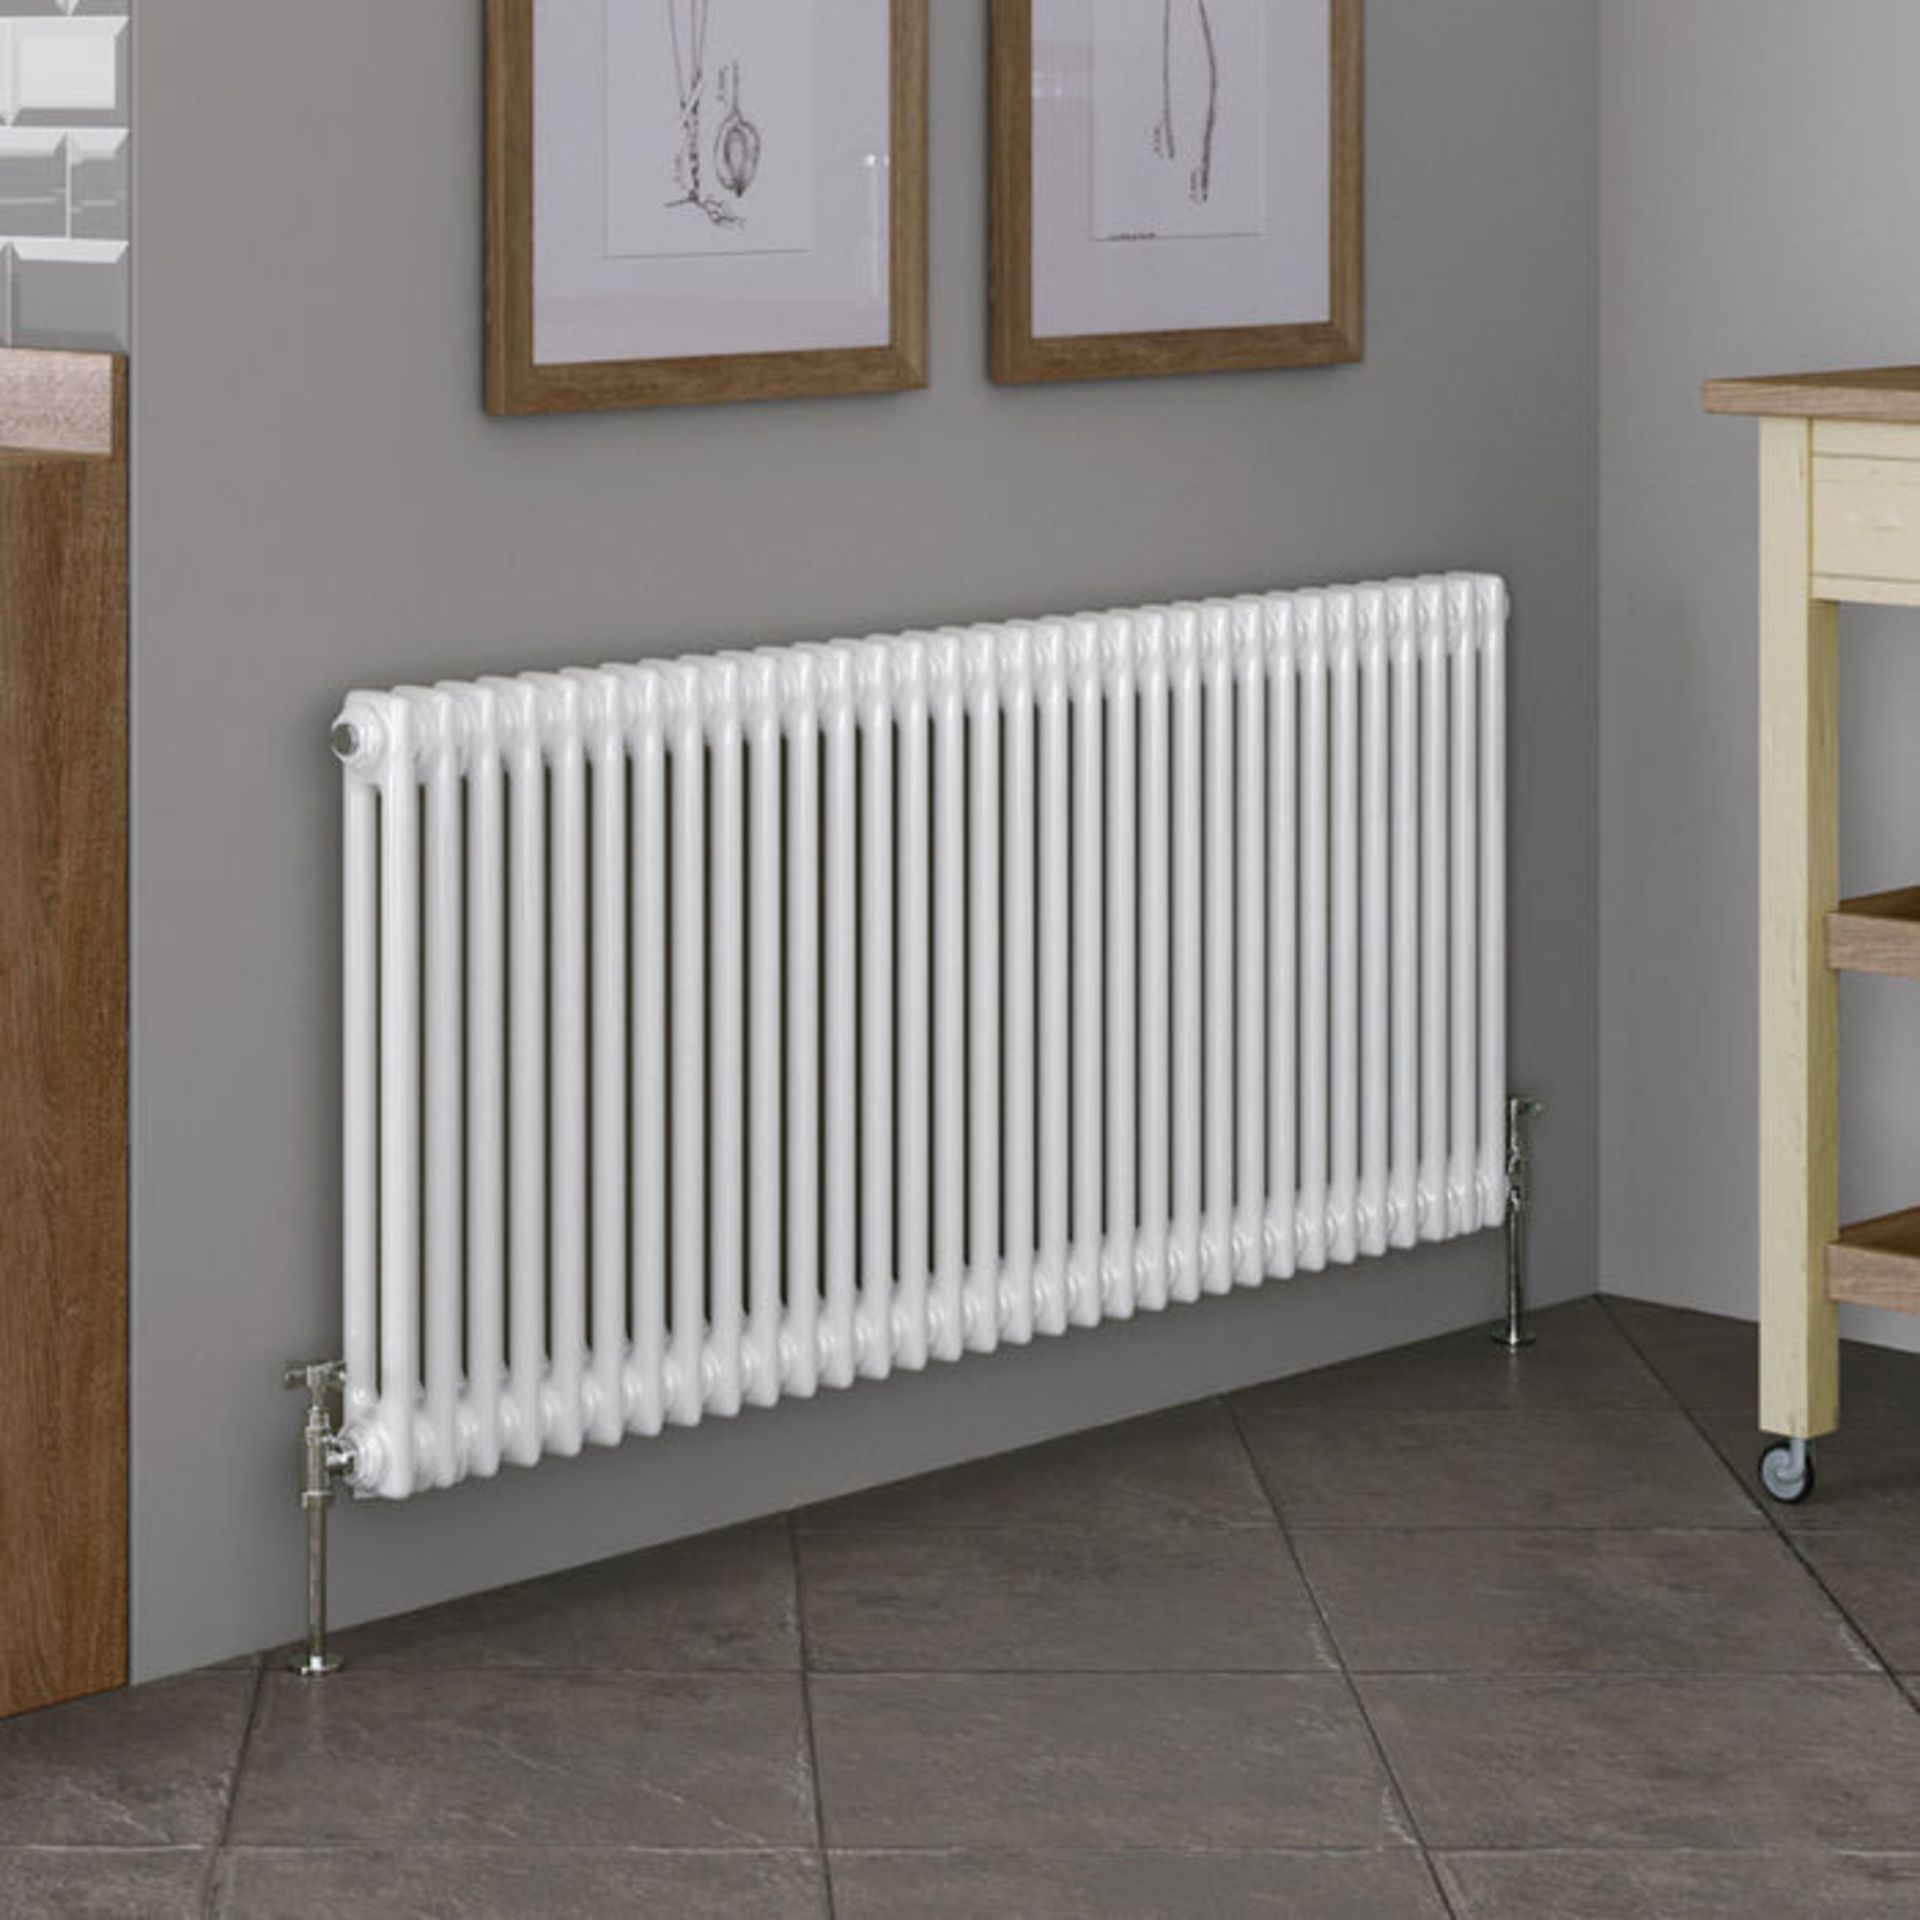 (KL50) 600x1458mm White Double Panel Horizontal Colosseum Traditional Radiator. RRP £606.99. Made - Image 3 of 4